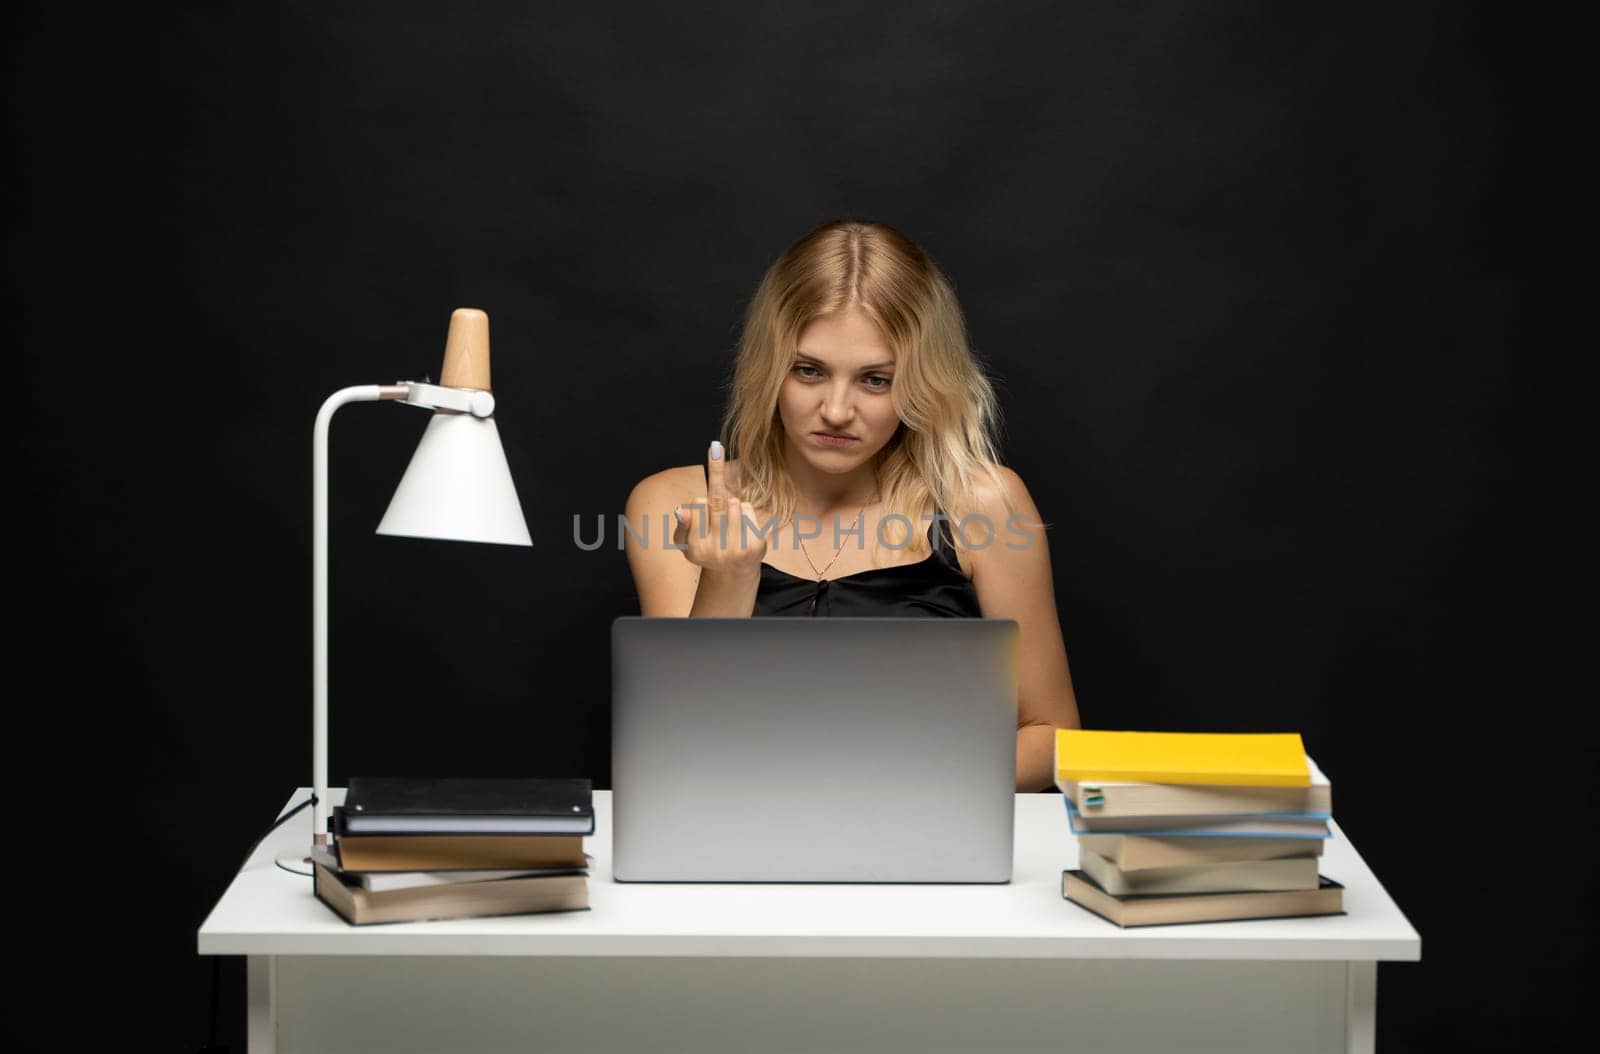 Portrait of young woman sitting at the table and showing middle finger in a laptop. by vovsht